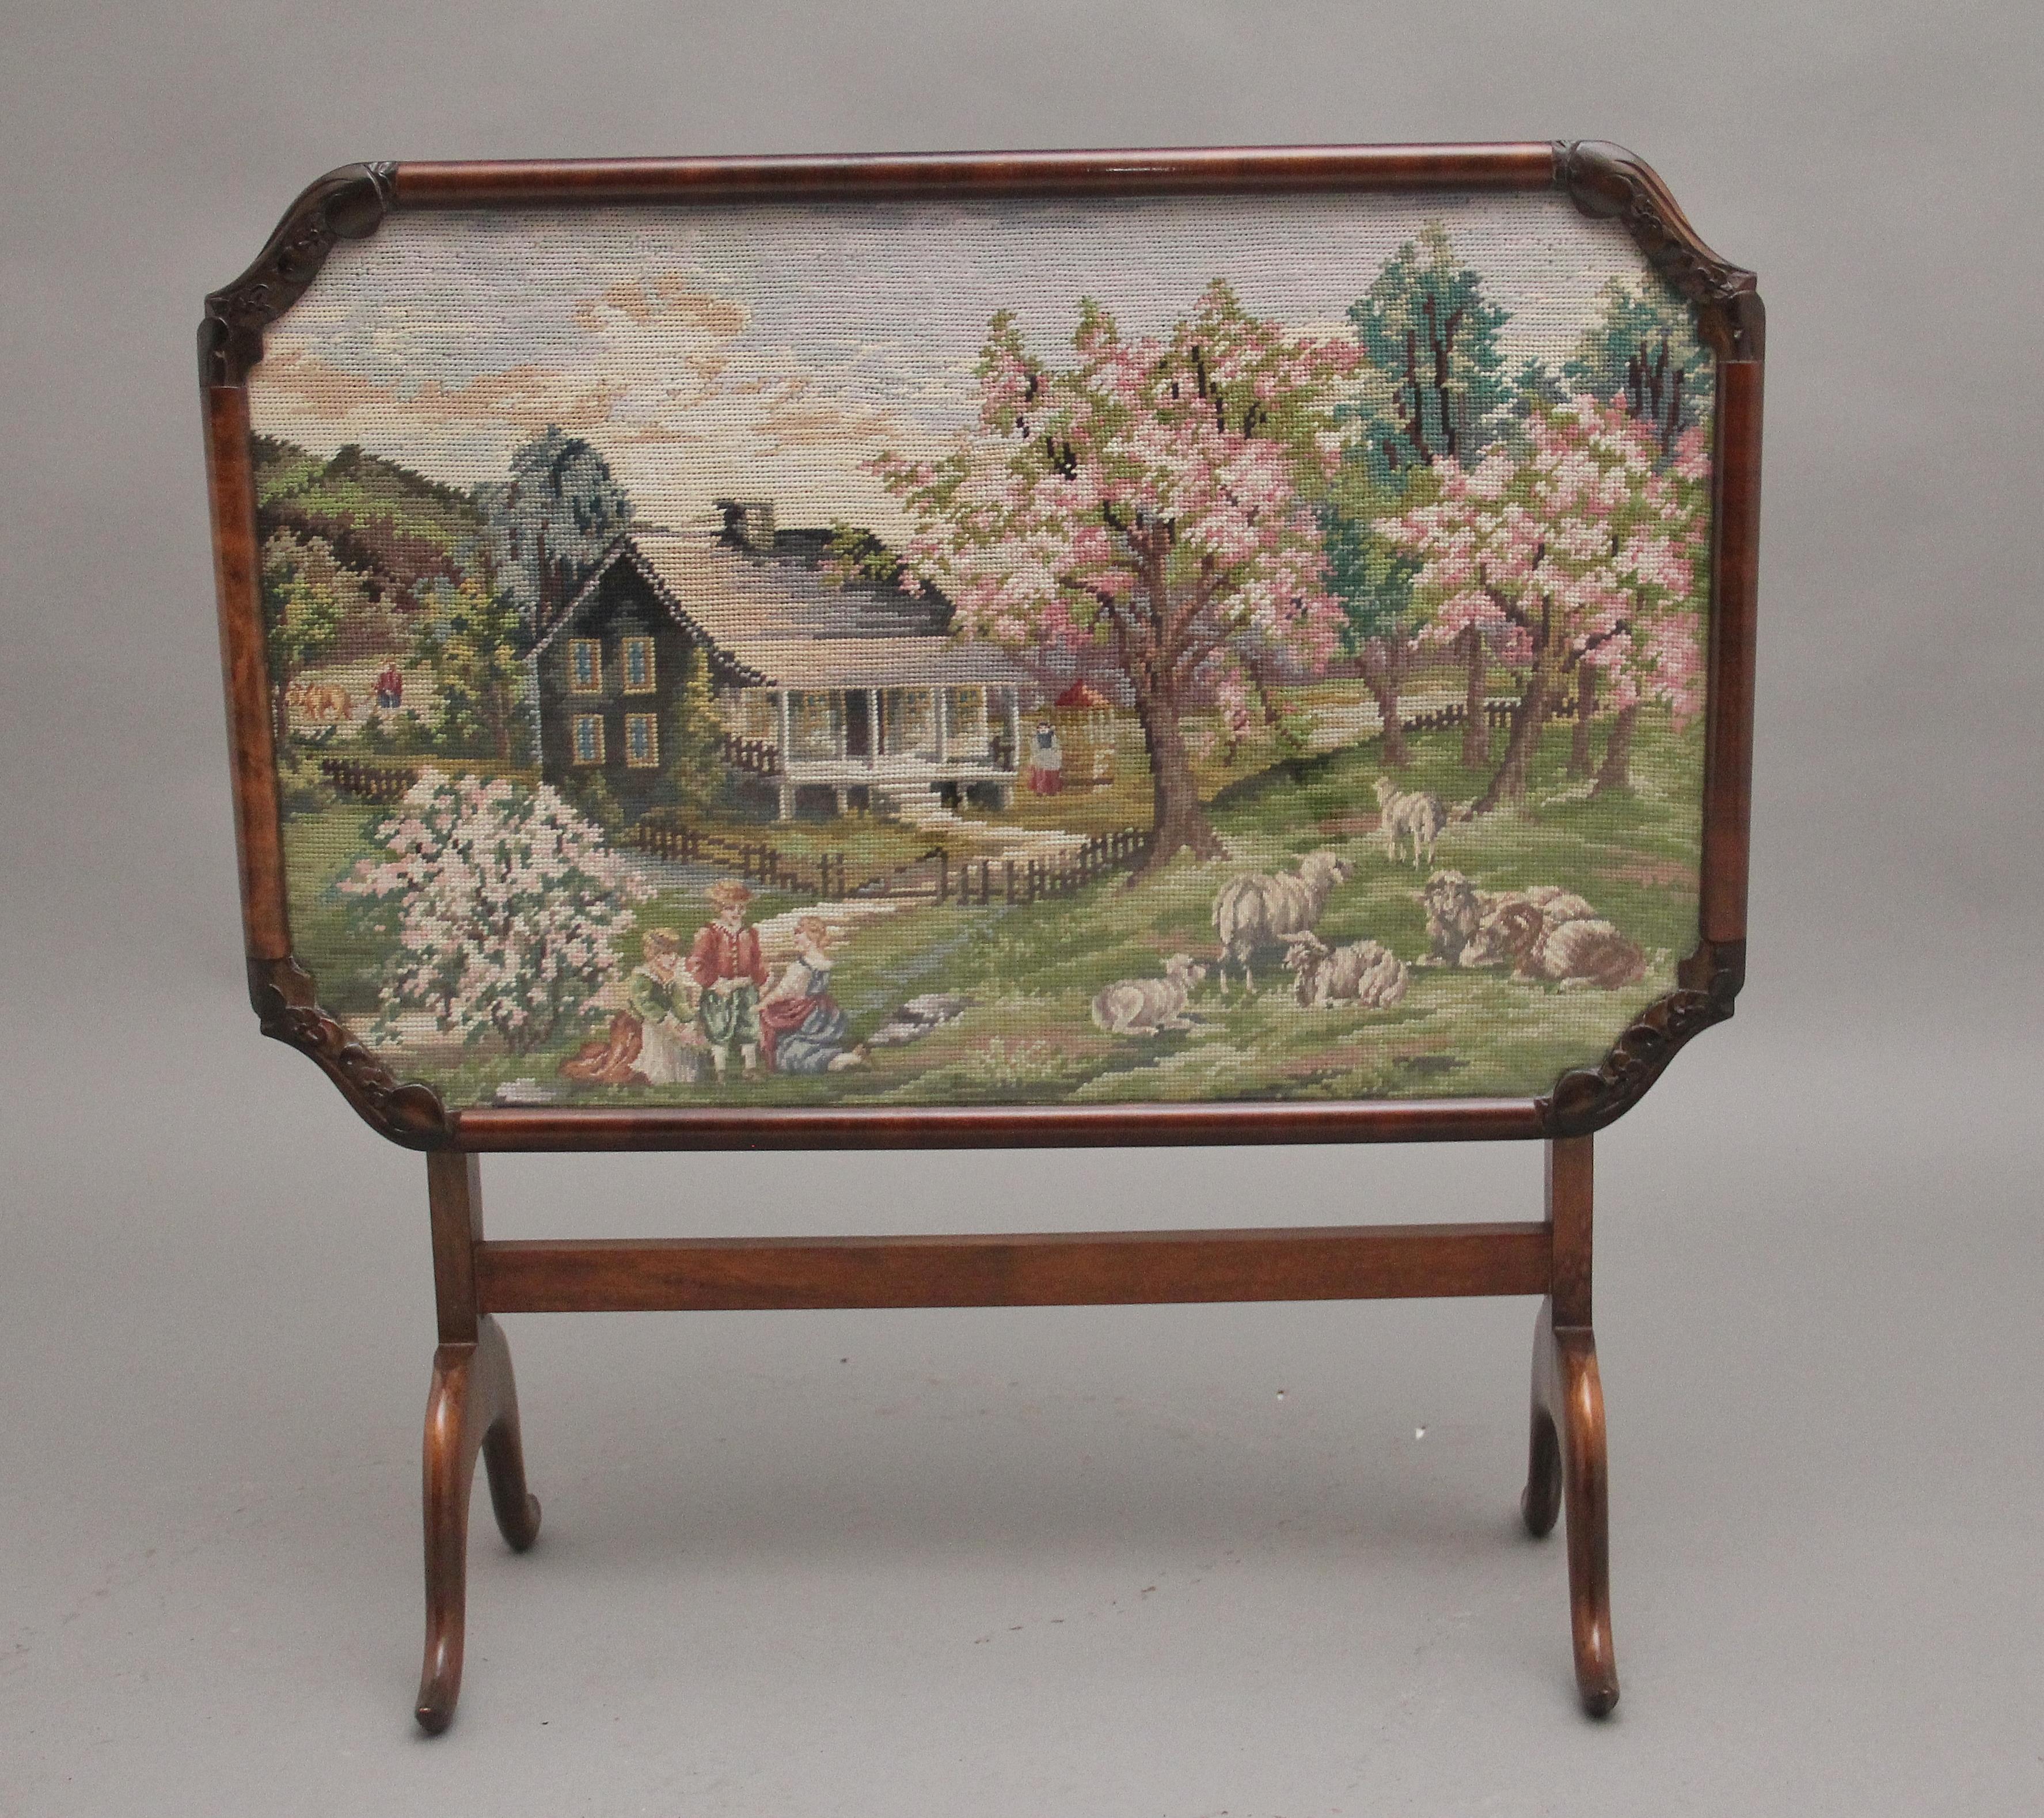 Mid 20th Century walnut fire screen / coffee table, the glazed screen having a needlepoint scene of an idyllic countryside setting, housed within a shaped and carved walnut frame, the screen lifts down so it can be used as a coffee table, supported